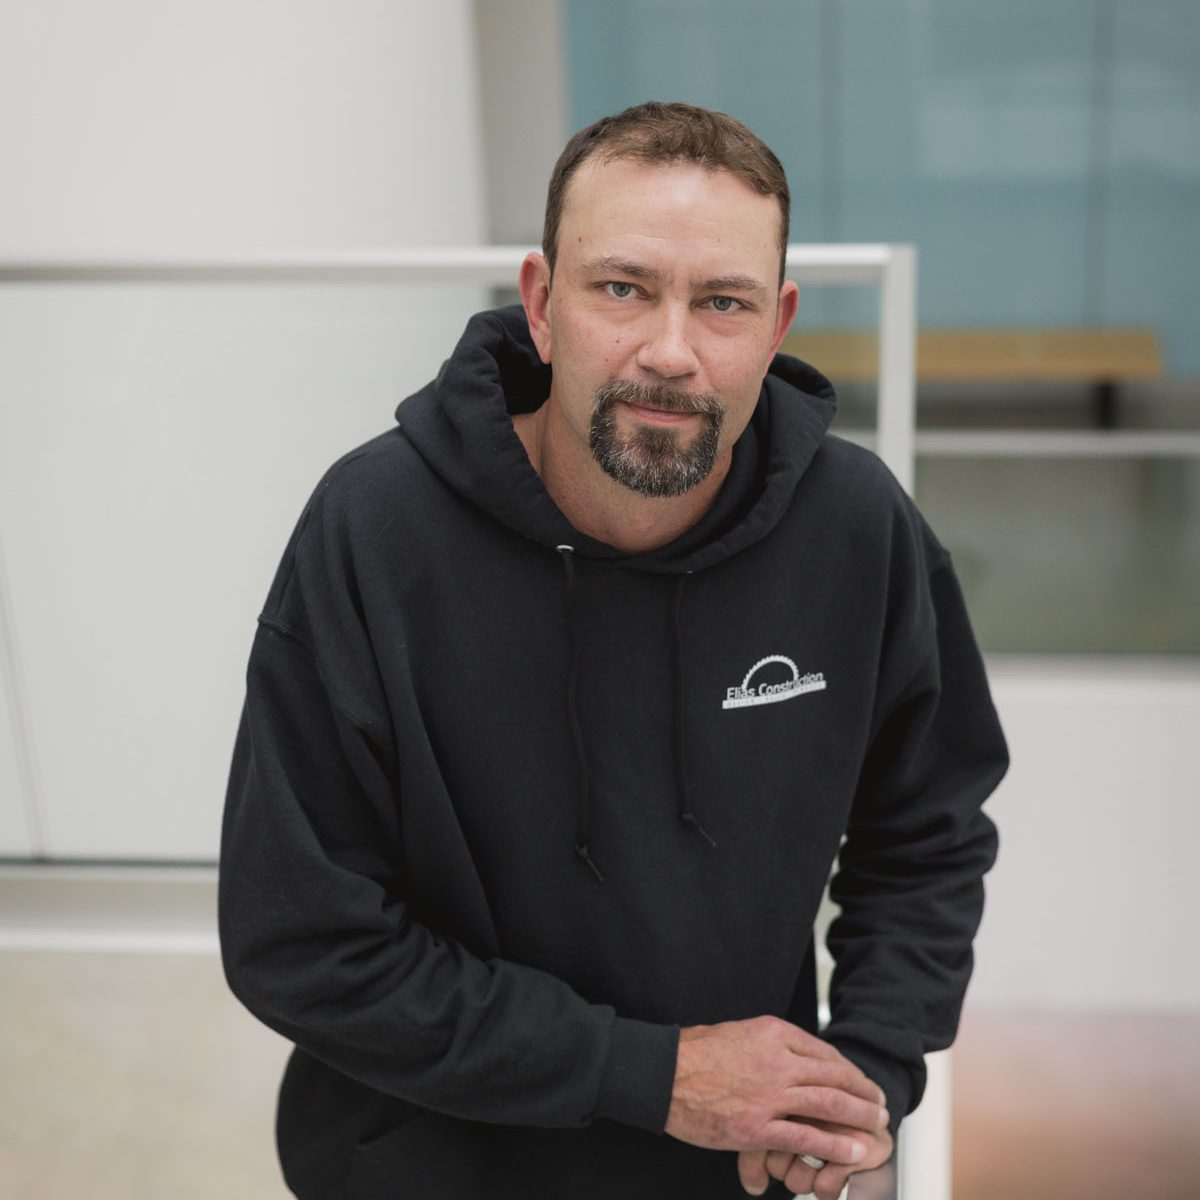 James was born and raised in Rochester and resides there to this day. He has 25 years of
experience and had his own finish carpentry business.
James considers himself a family man with three kids, a people person and an artist.